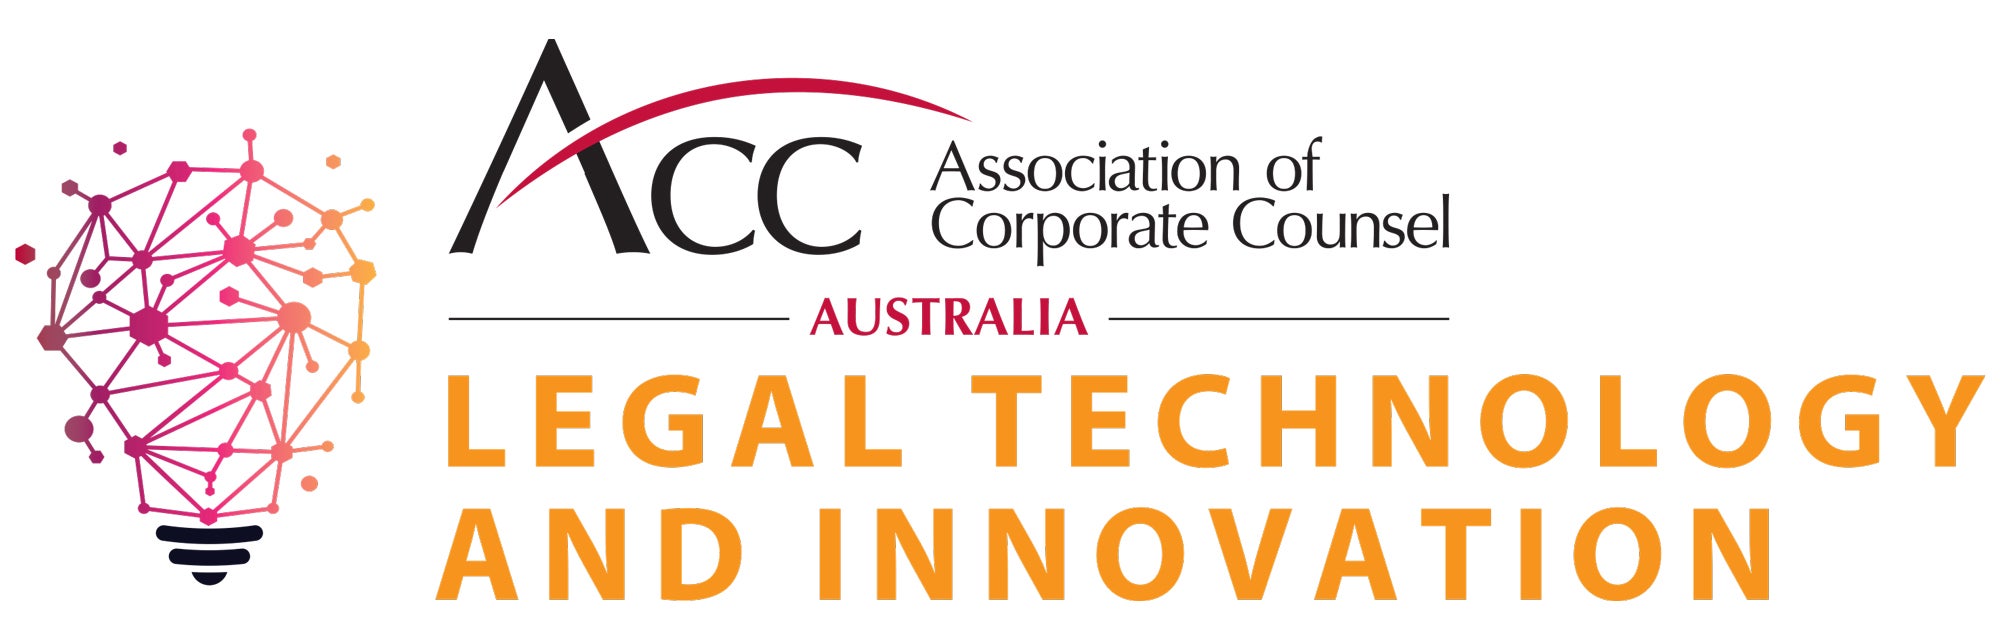 Legal Technology and Innovation